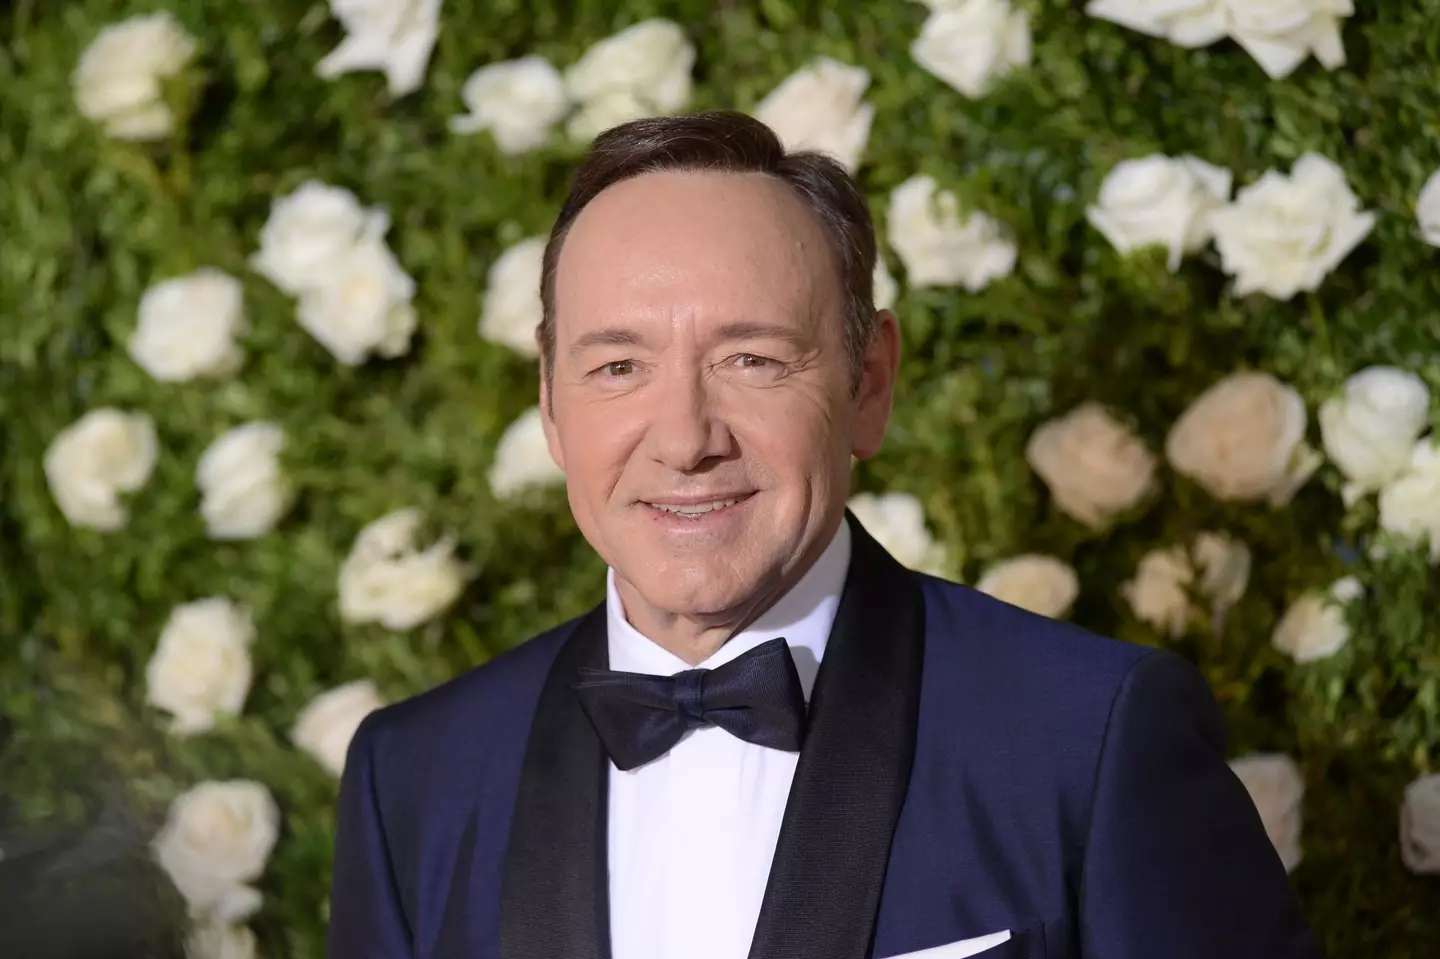 Kevin Spacey has said he will voluntarily appear in British court.